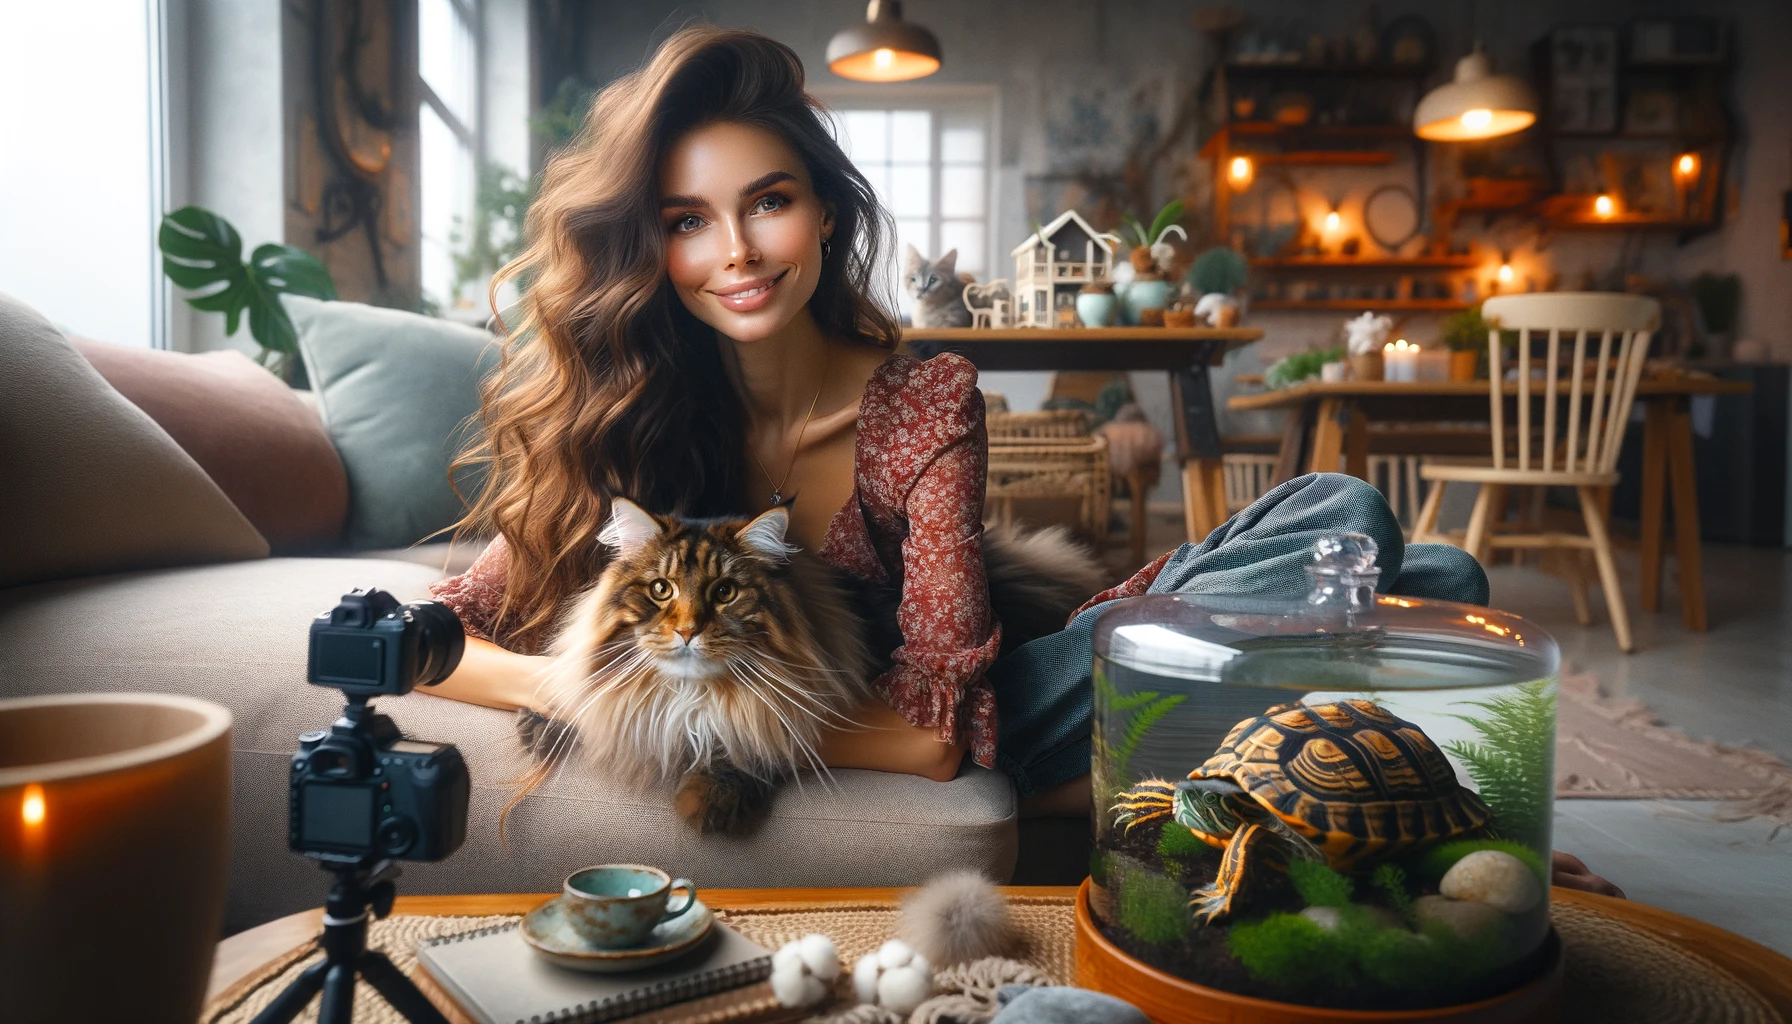 Here's the featured blog post photo, capturing Chas in a cozy, well-lit setting with her beloved pets—a majestic Maine Coon and a miniature turtle. The image exudes warmth and joy, perfectly embodying the essence of a pet influencer's life and Chas's passion for her animals. This vibrant and engaging visual is ideal for accompanying your blog post, inviting readers into the world of pet influencing with Chas.